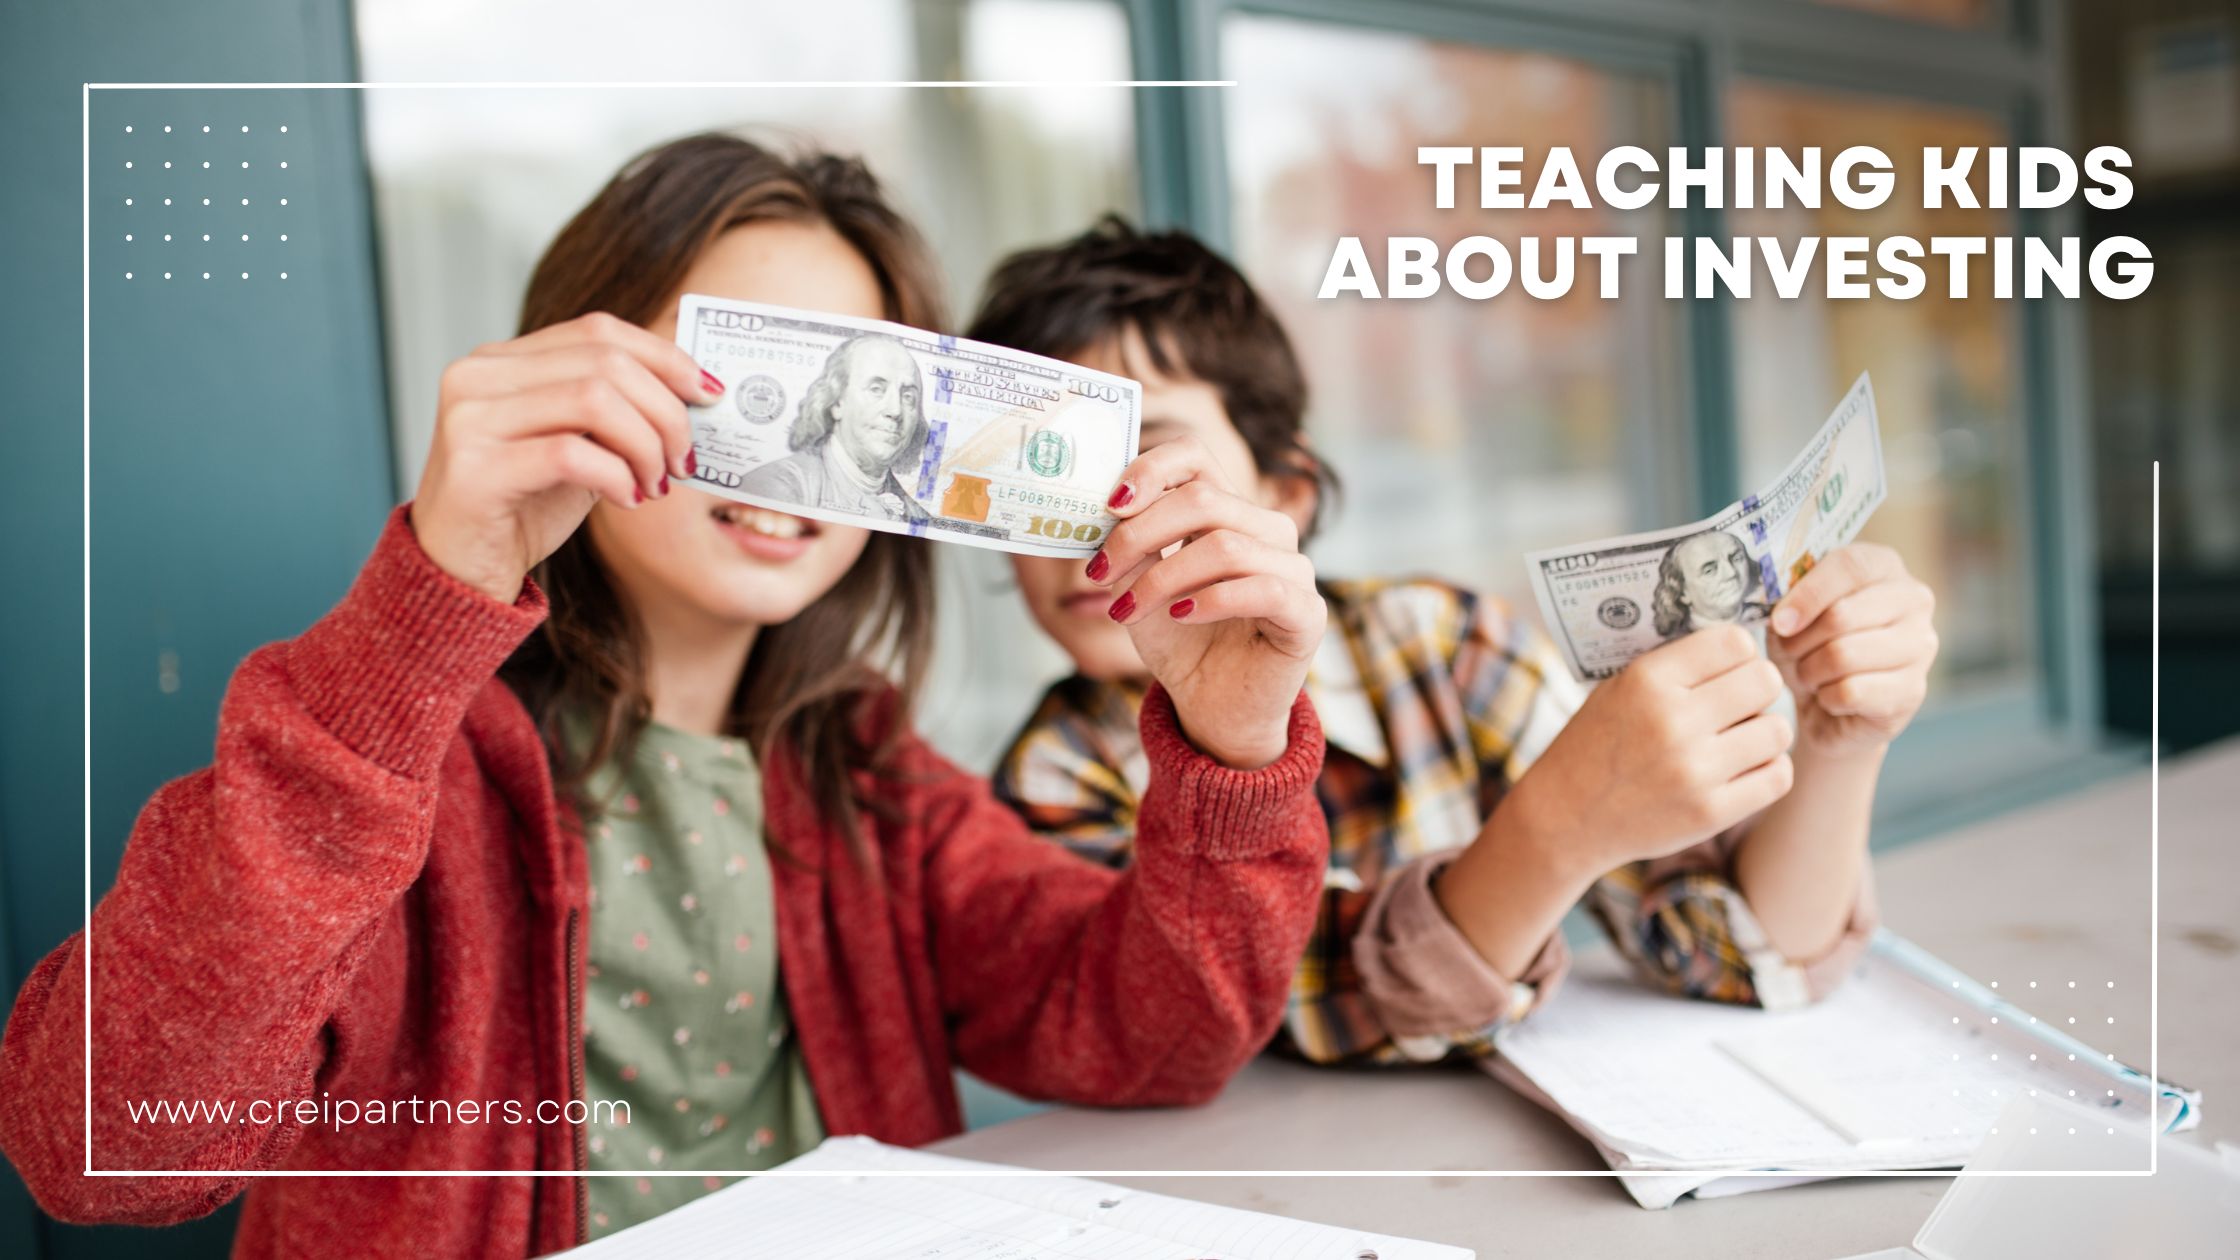 Teaching Kids About Investing by CREI Partners